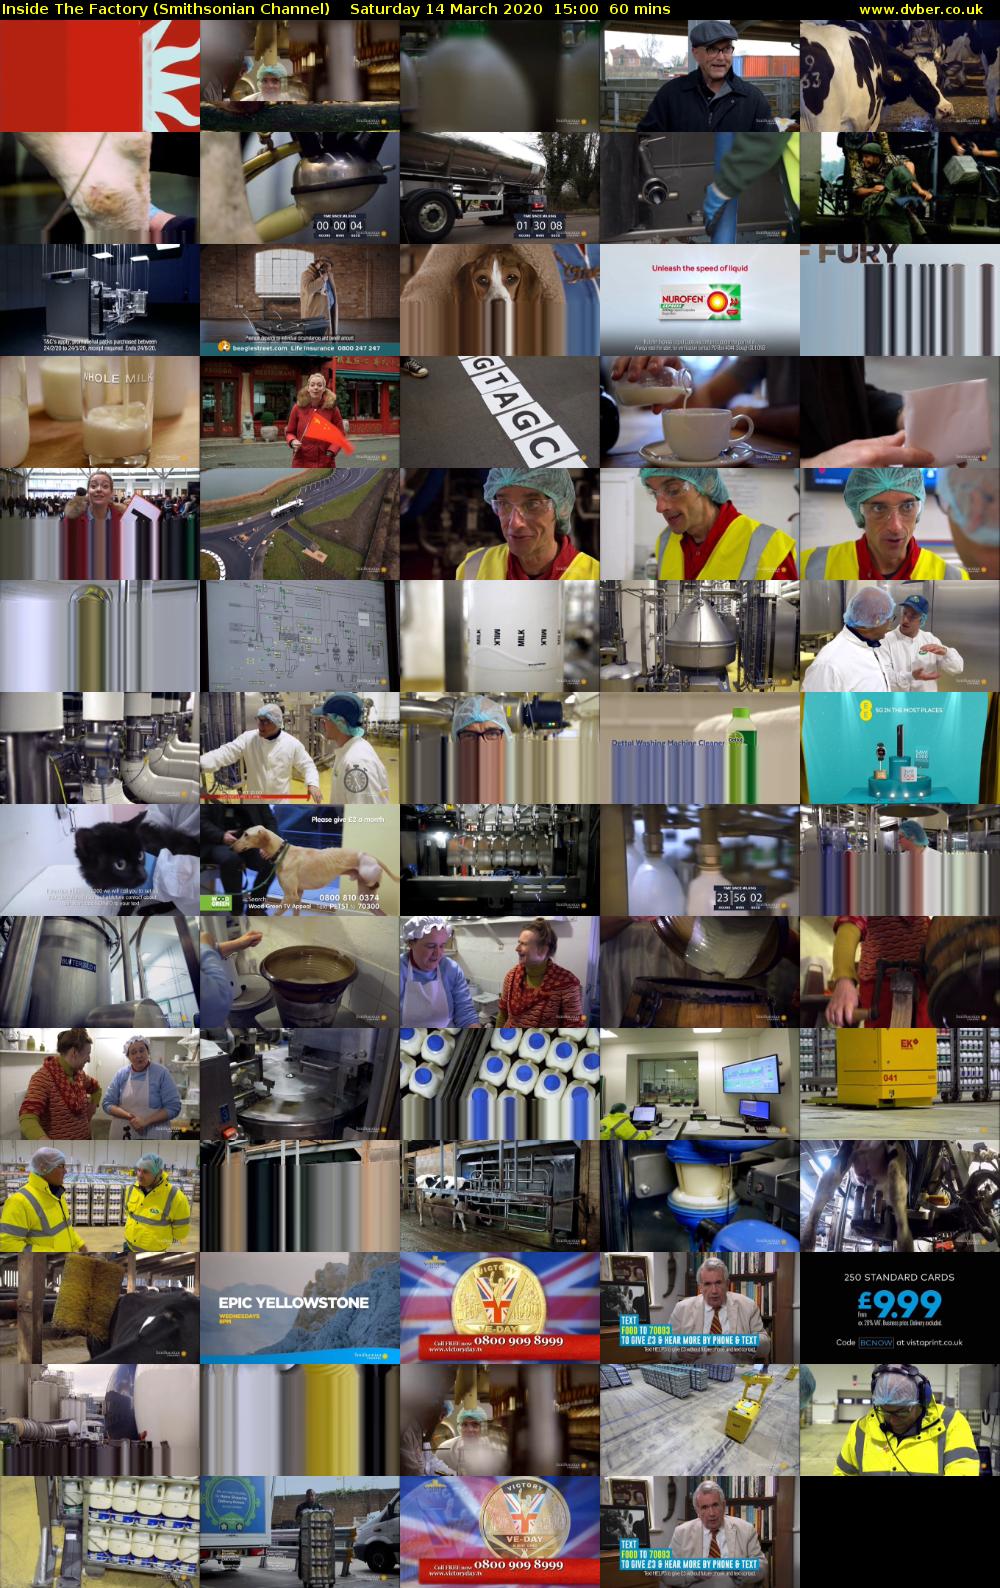 Inside The Factory (Smithsonian Channel) Saturday 14 March 2020 15:00 - 16:00